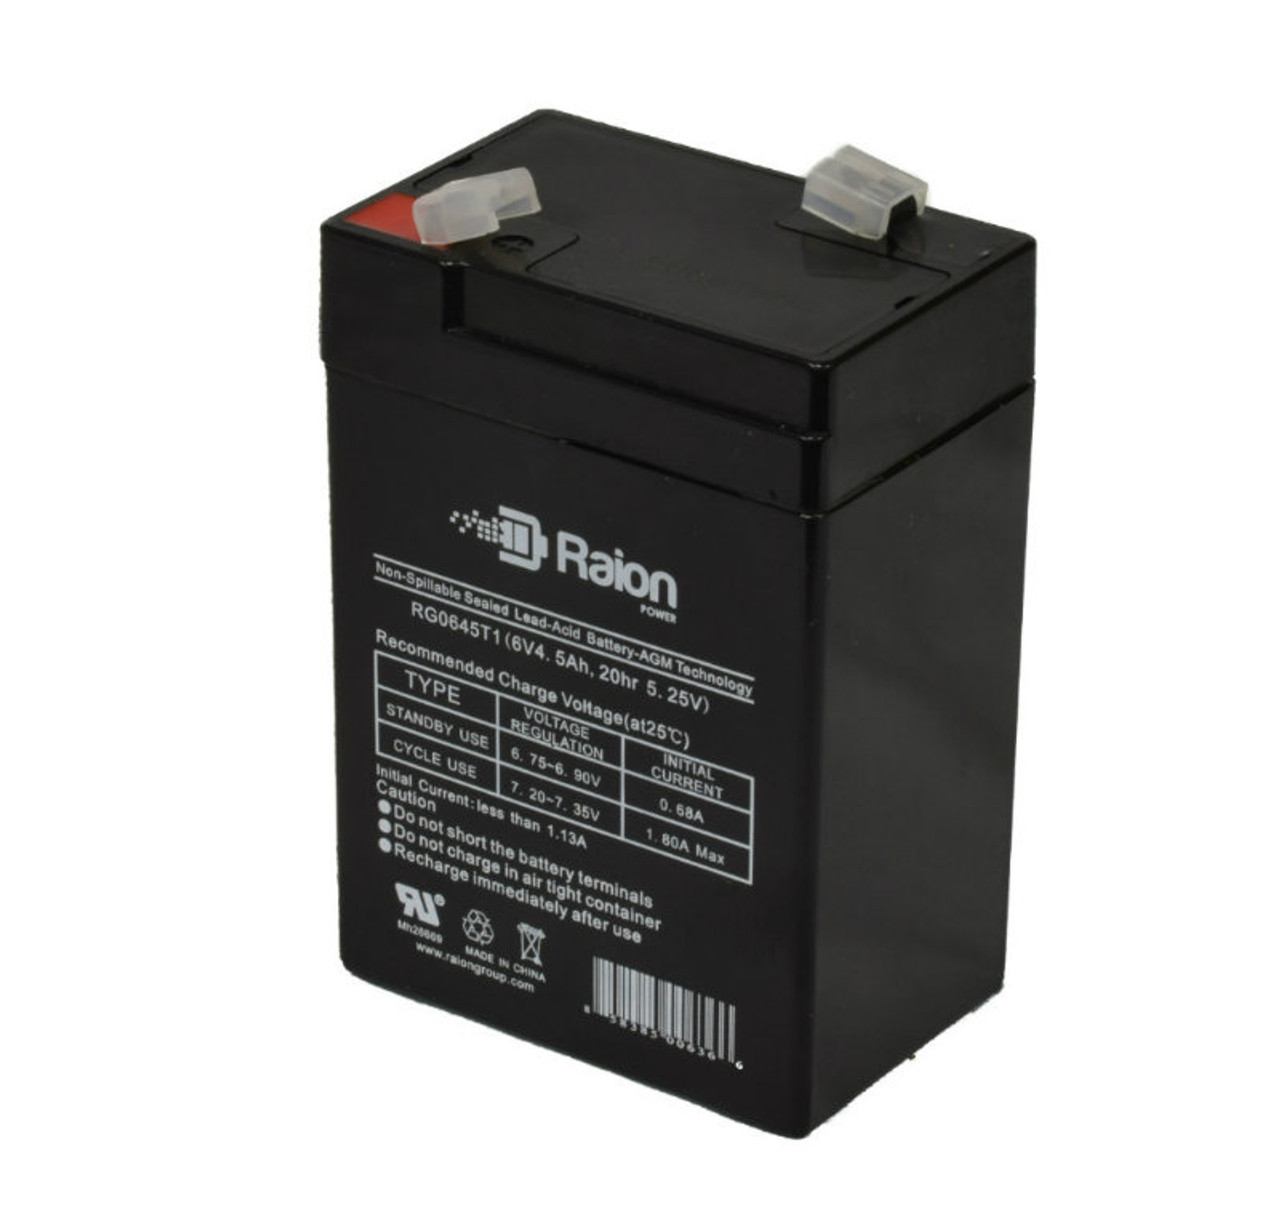 Raion Power RG0645T1 6V 4.5Ah Replacement Battery Cartridge for Light Alarms U8